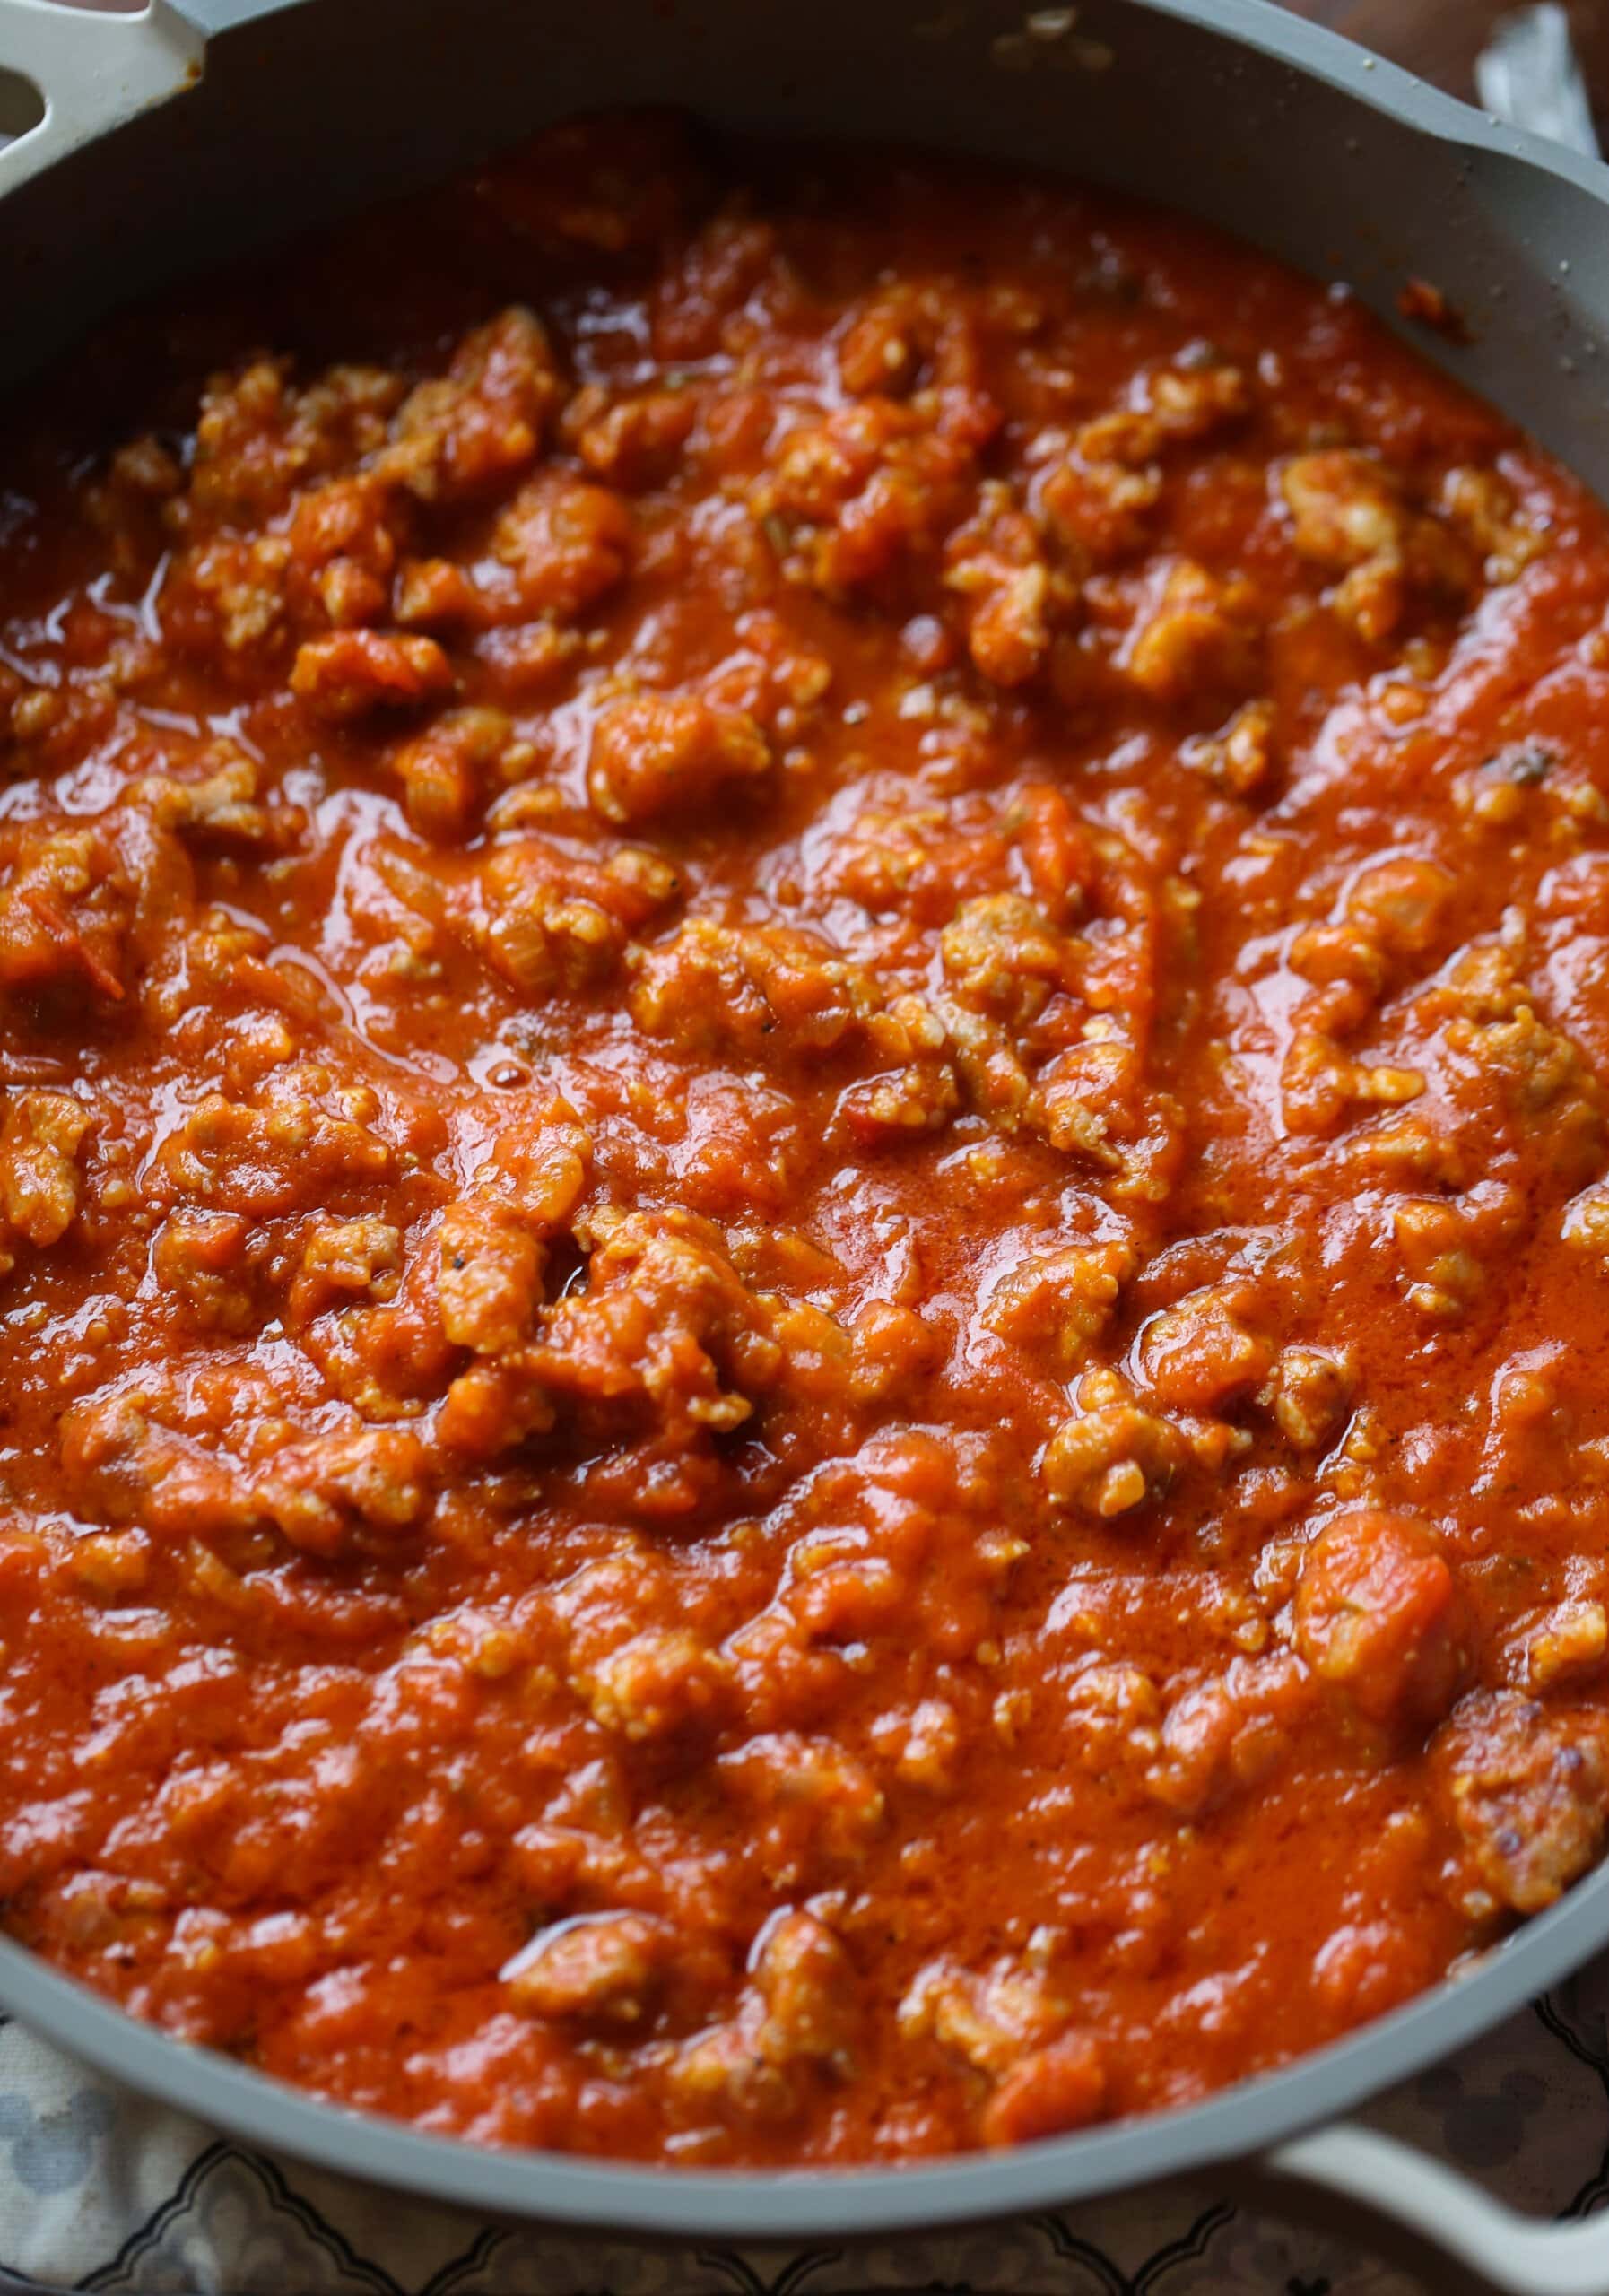 Italian sausage combined with marinara for the meat sauce.